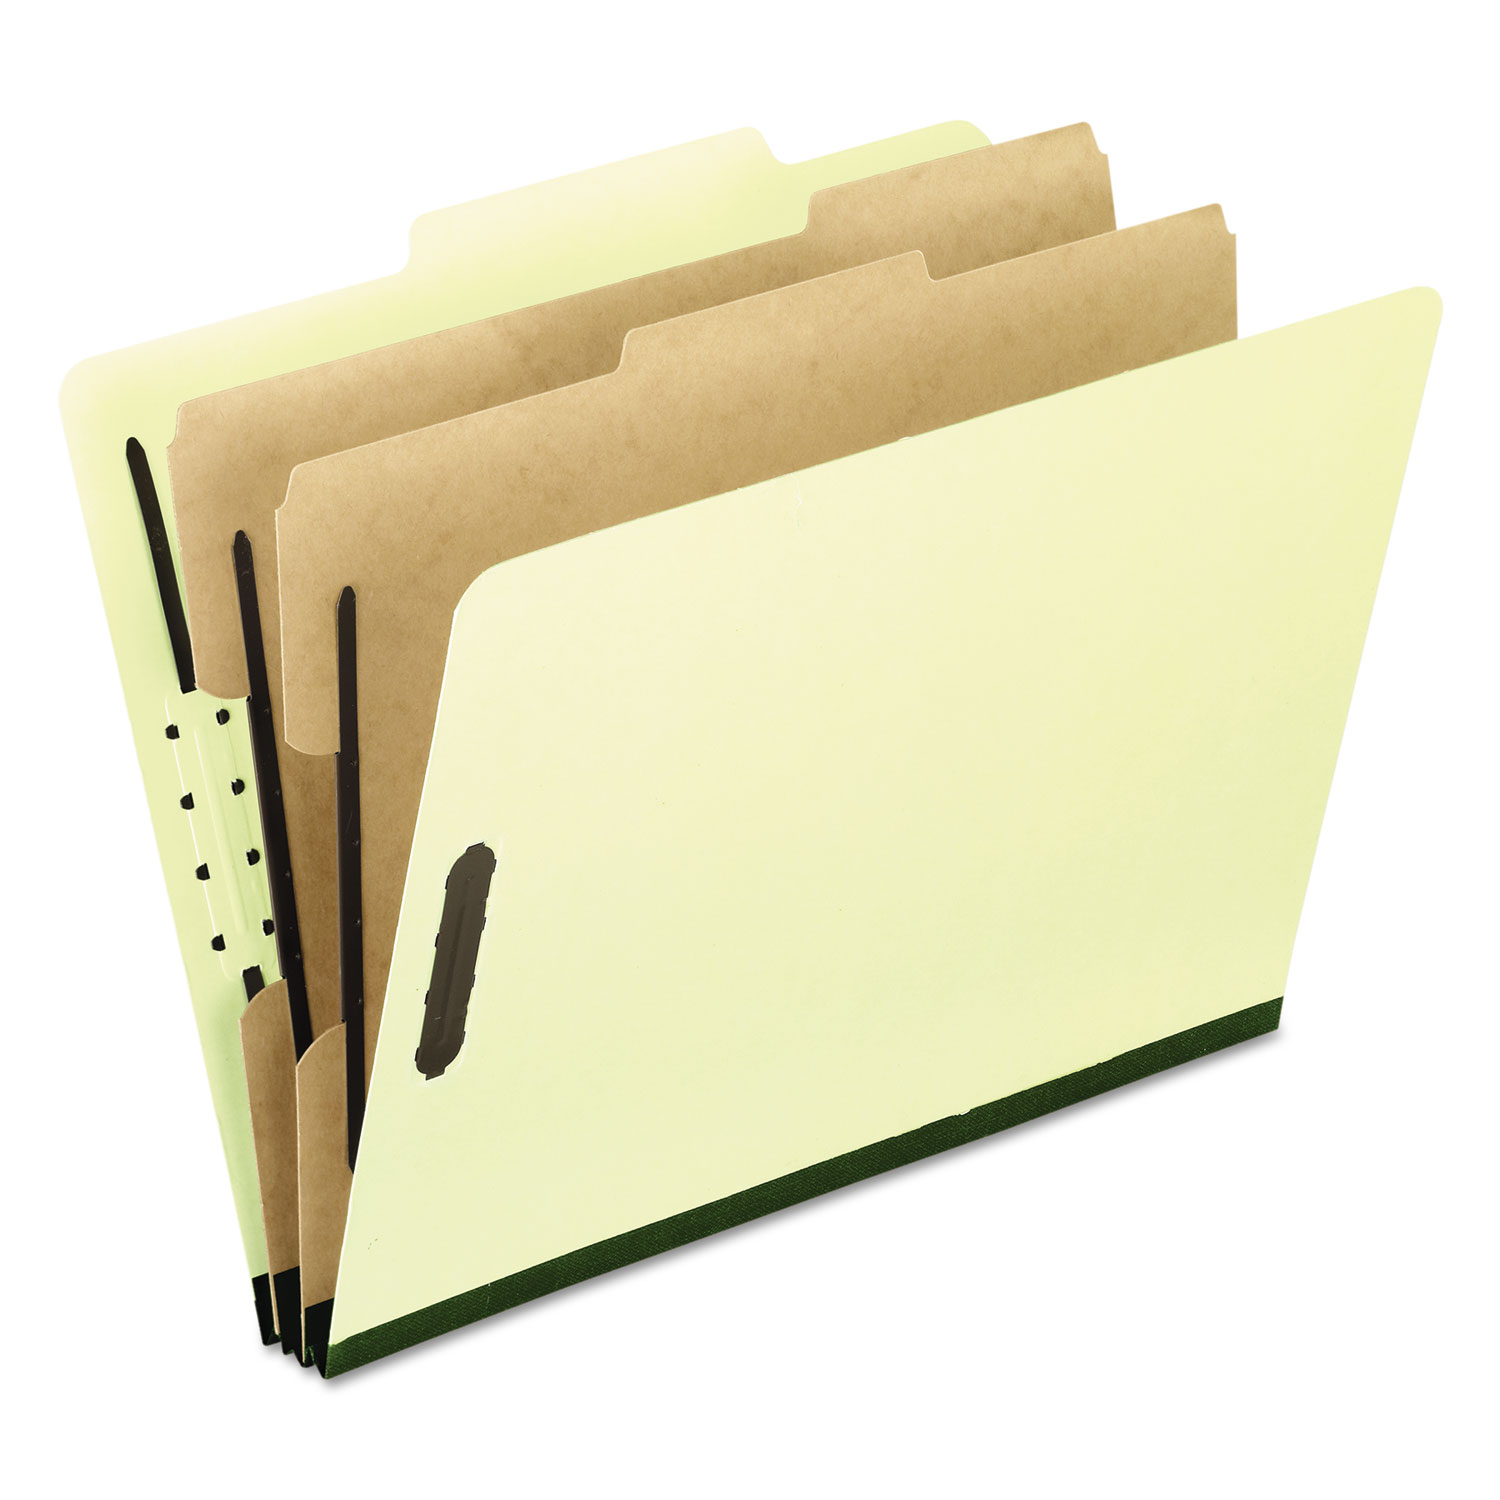  Pendaflex 1257G Four-, Six-, and Eight-Section Pressboard Classification Folders, 2 Dividers, Embedded Fasteners, Letter, Light Green, 10/Box (PFX1257G) 